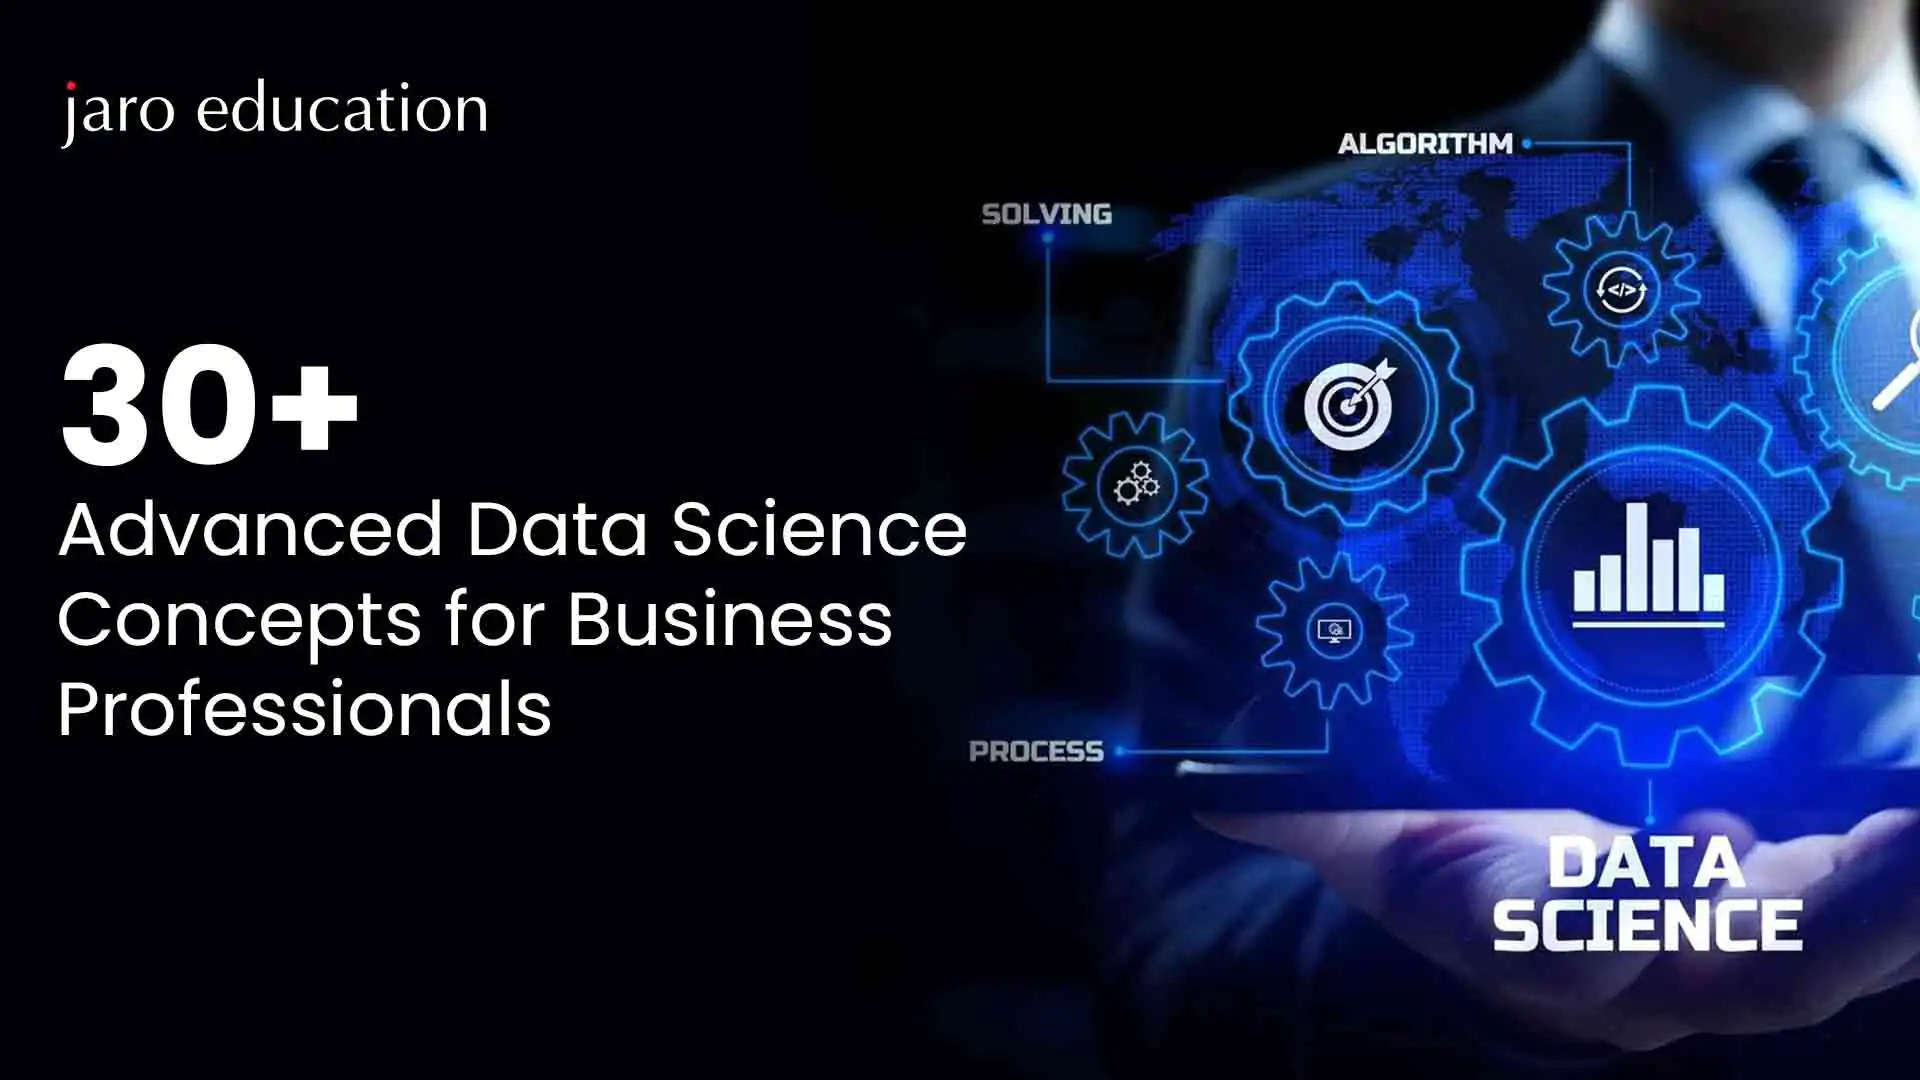 30+ Advanced Data Science Concepts for Business Professionals